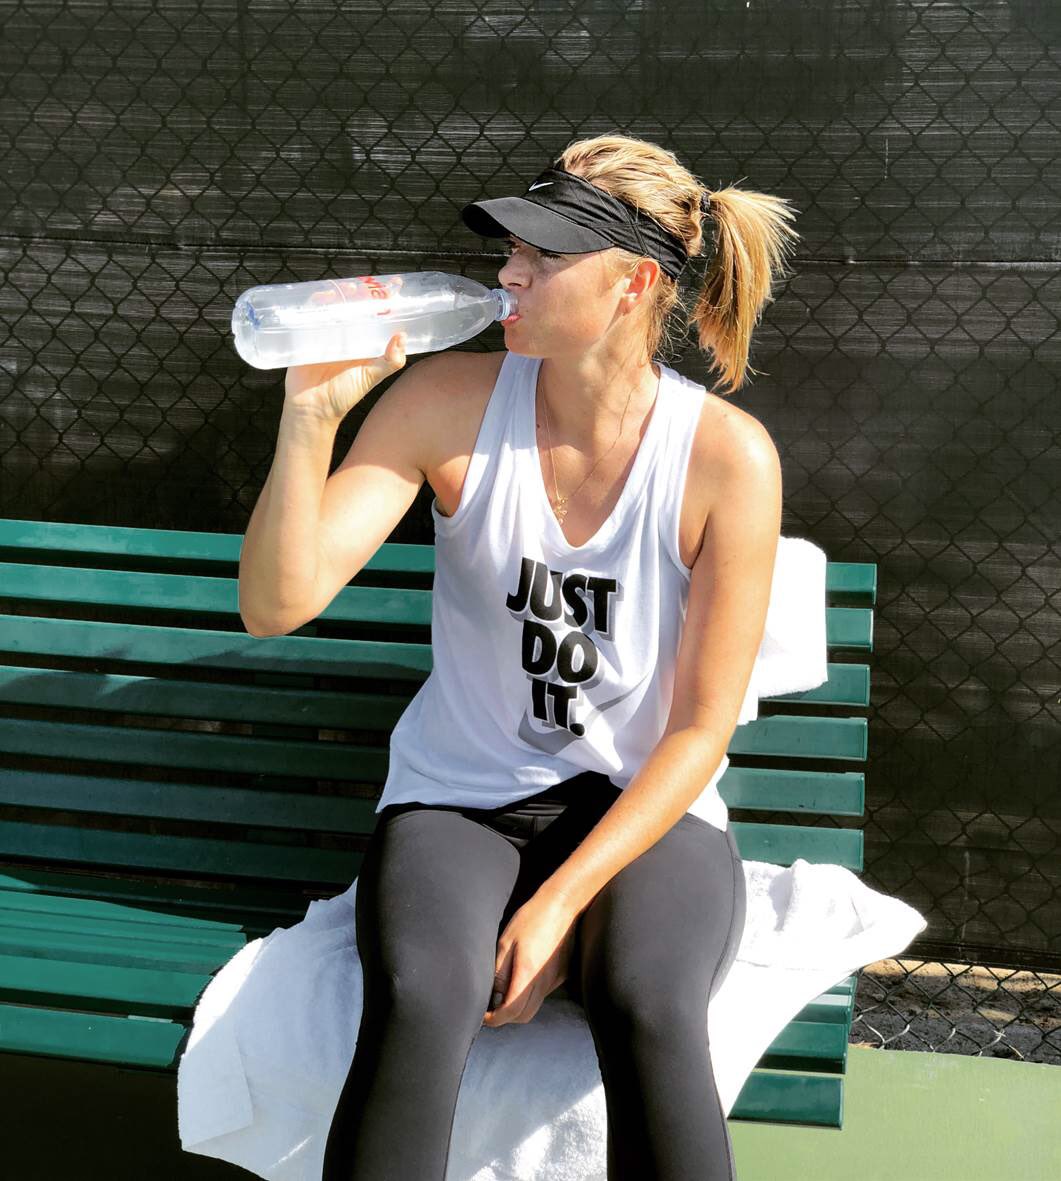 Long days on the court require me to keep up my hydration throughout. With soft, smooth water of course ???? #evian https://t.co/aBMI44CC0k